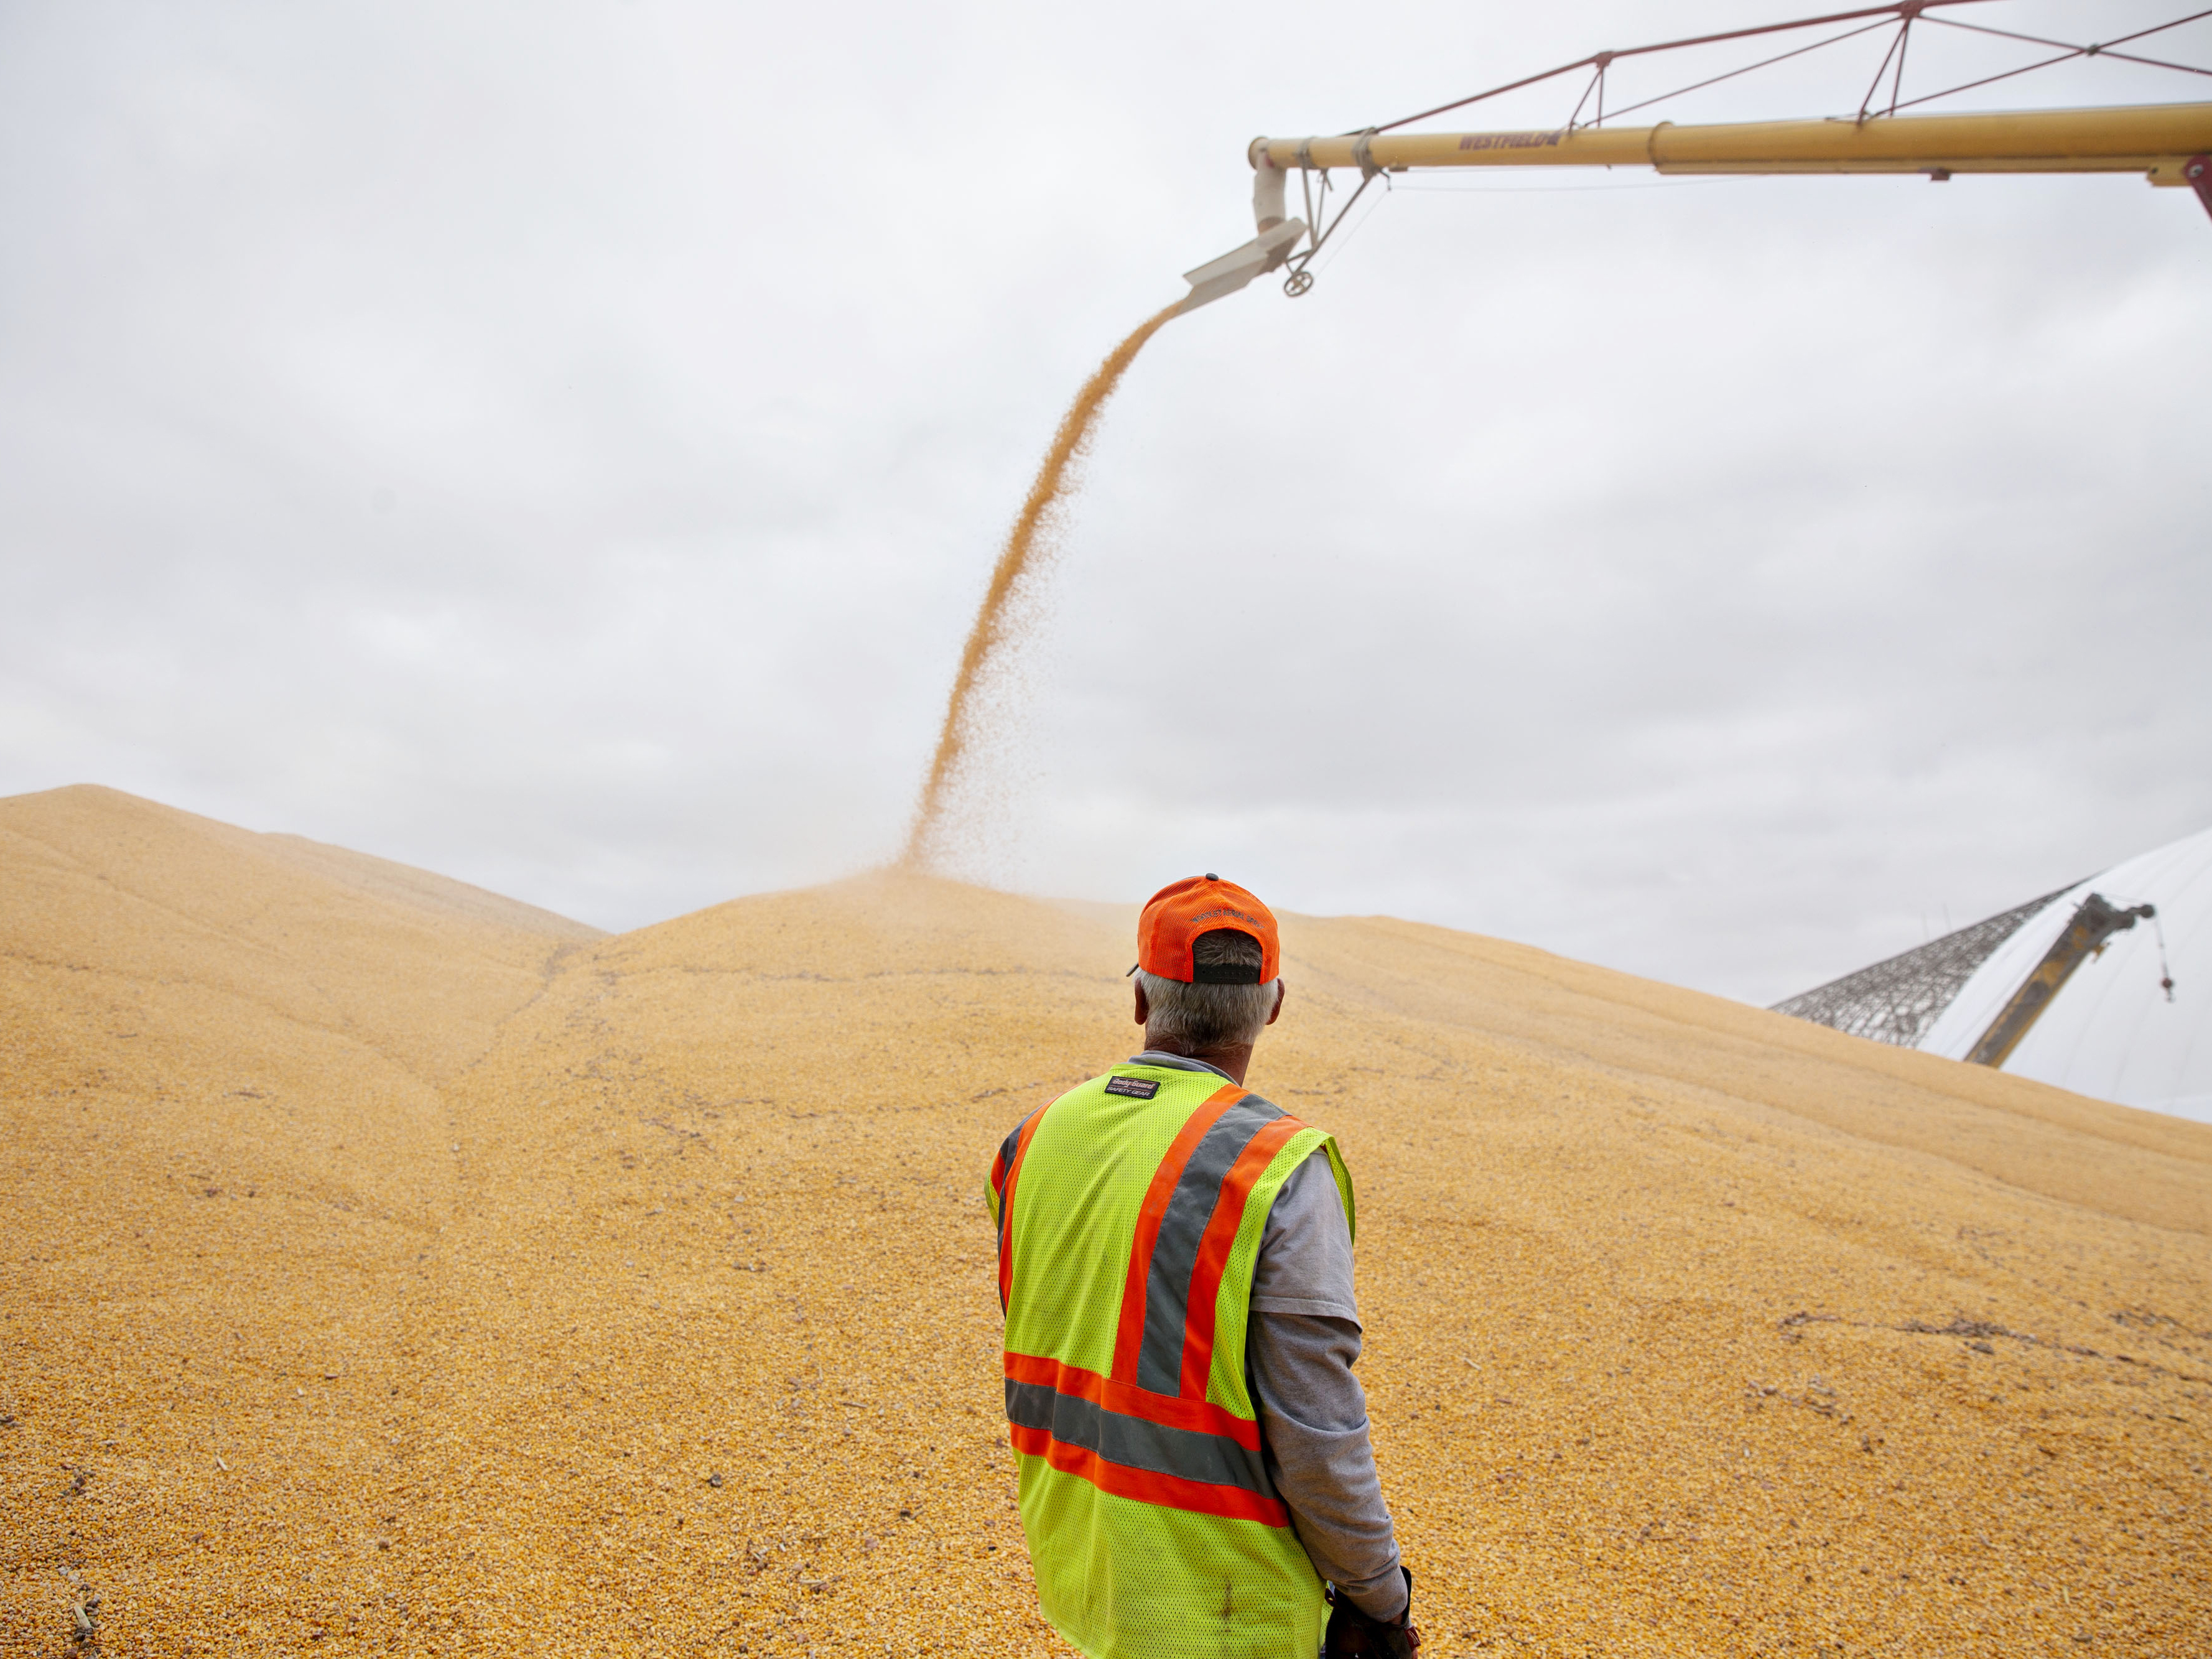 A Very Bad Day for U.S. Farmers: Exports, Sales, Incomes All Hit